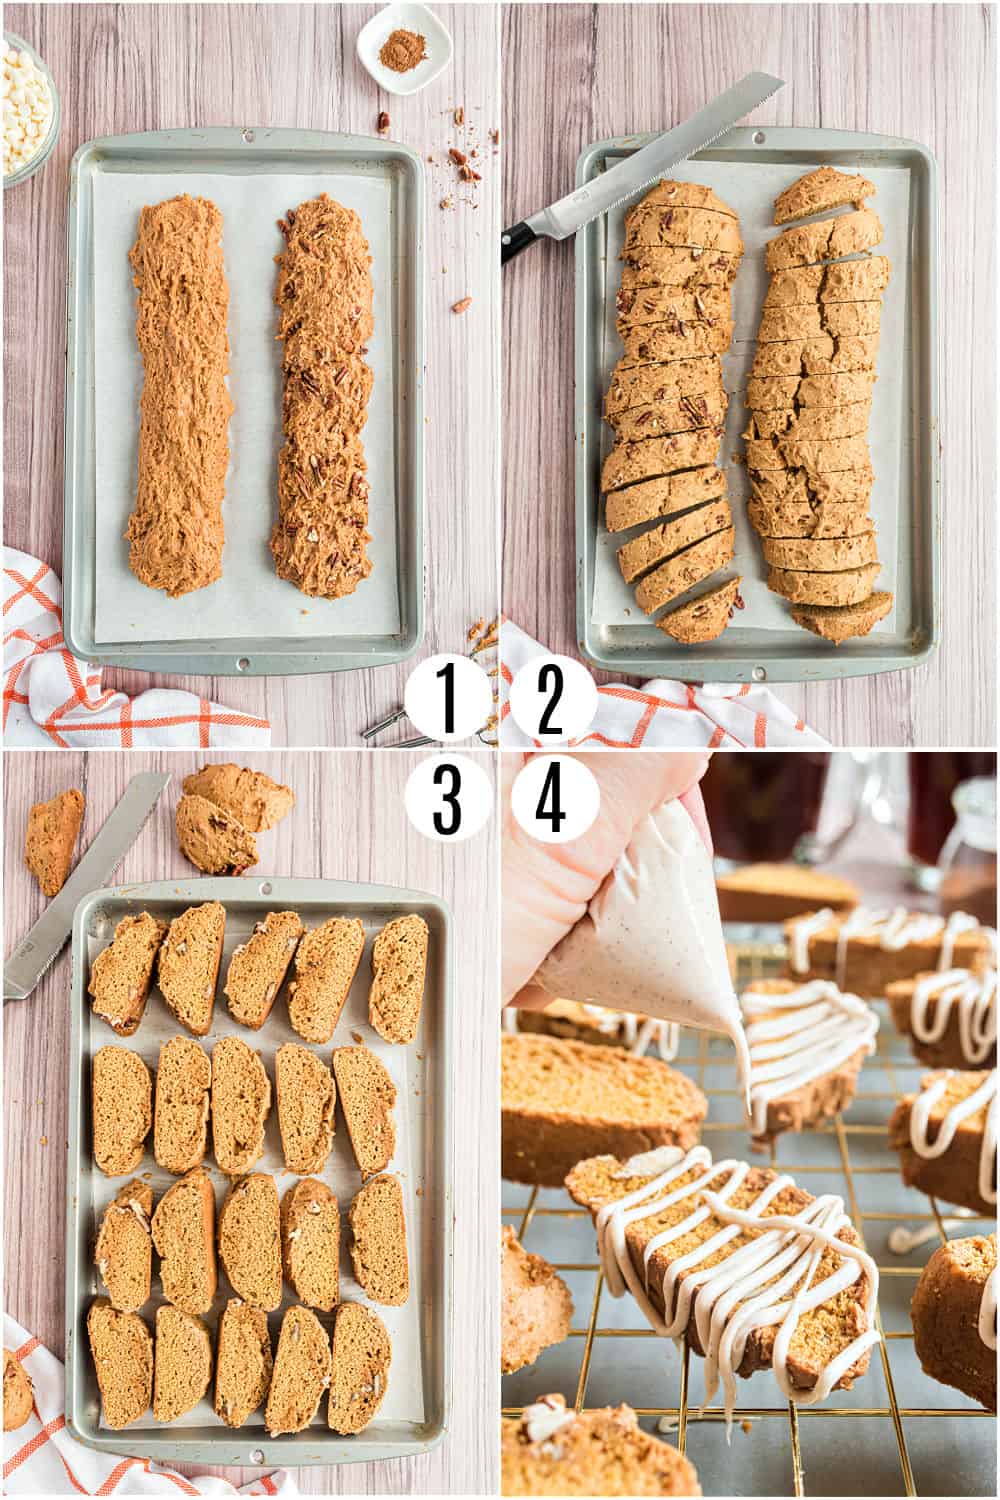 Step by step photos showing how to make pumpkin spice biscotti.